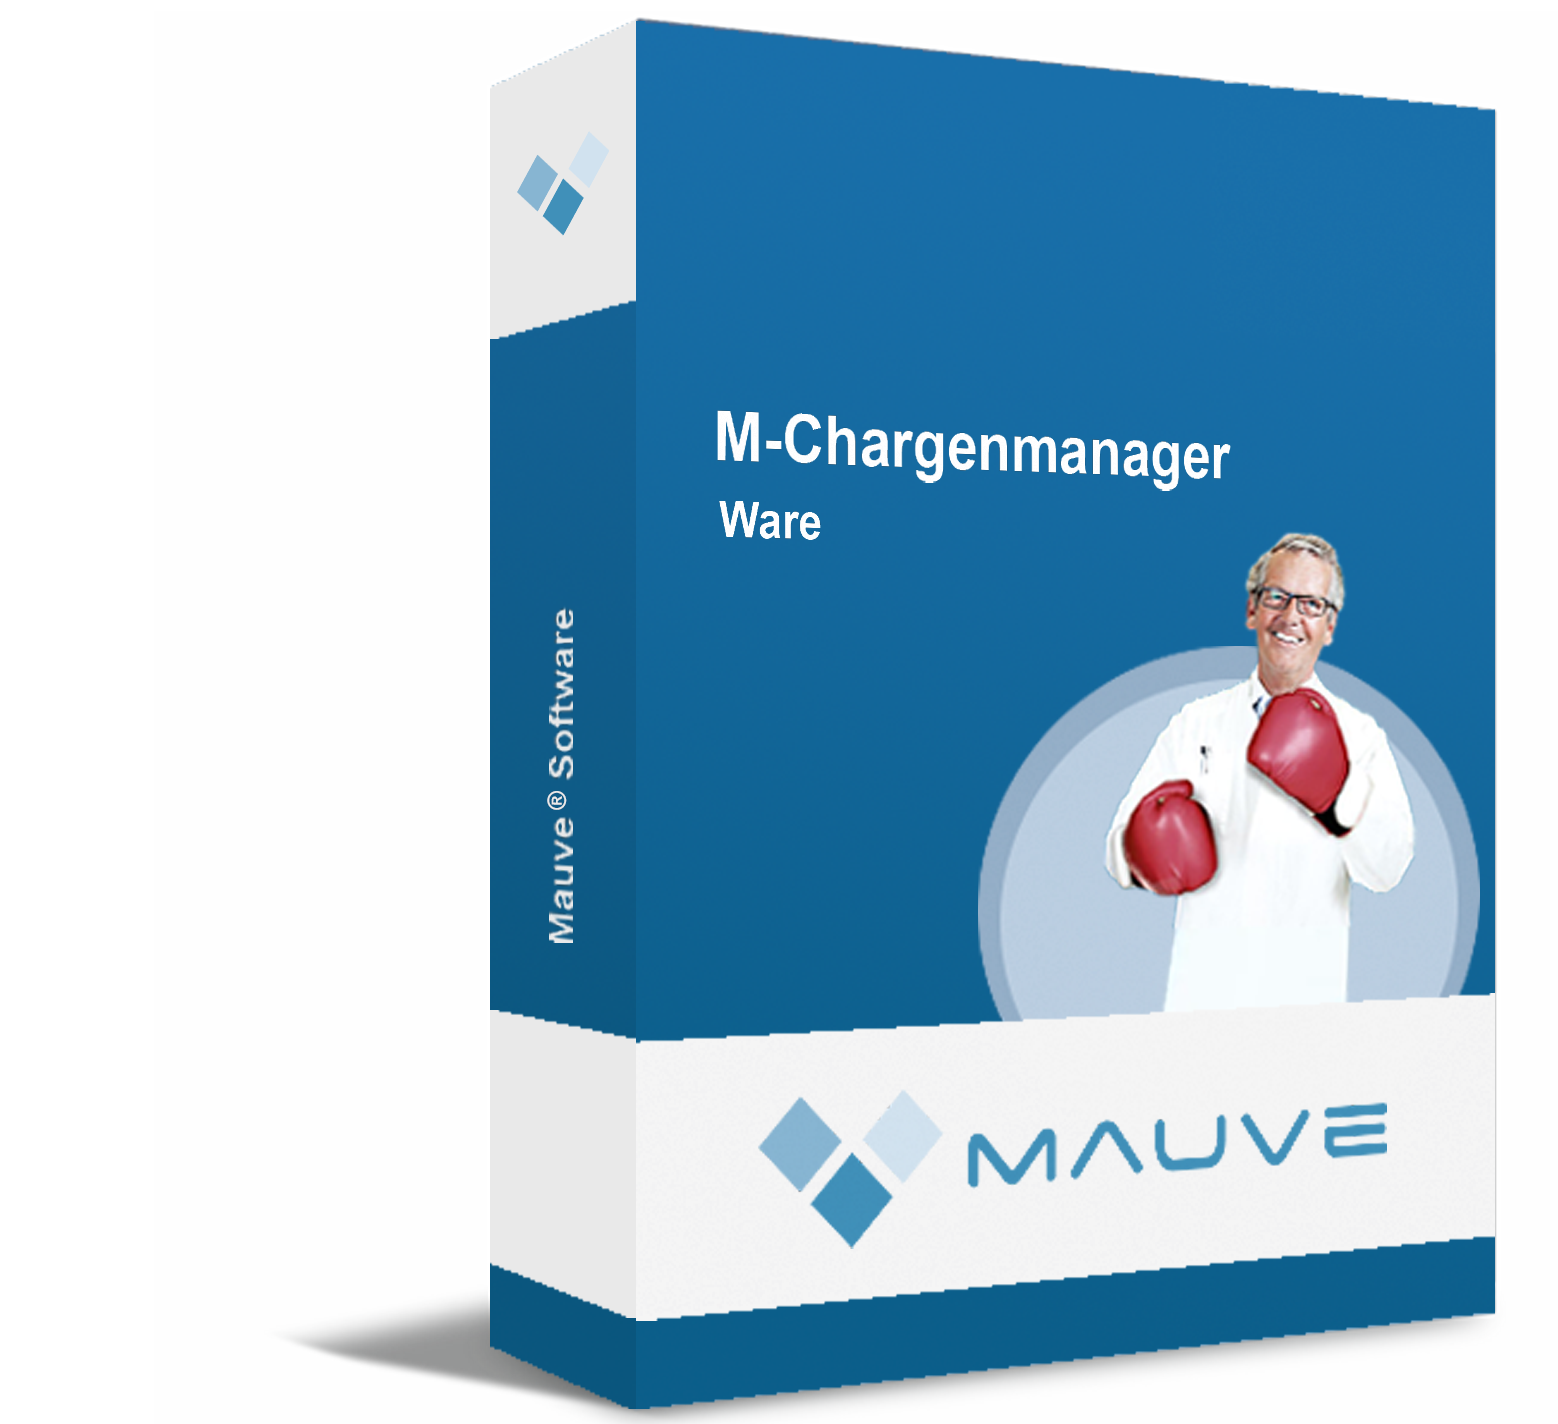 M-Chargenmanager